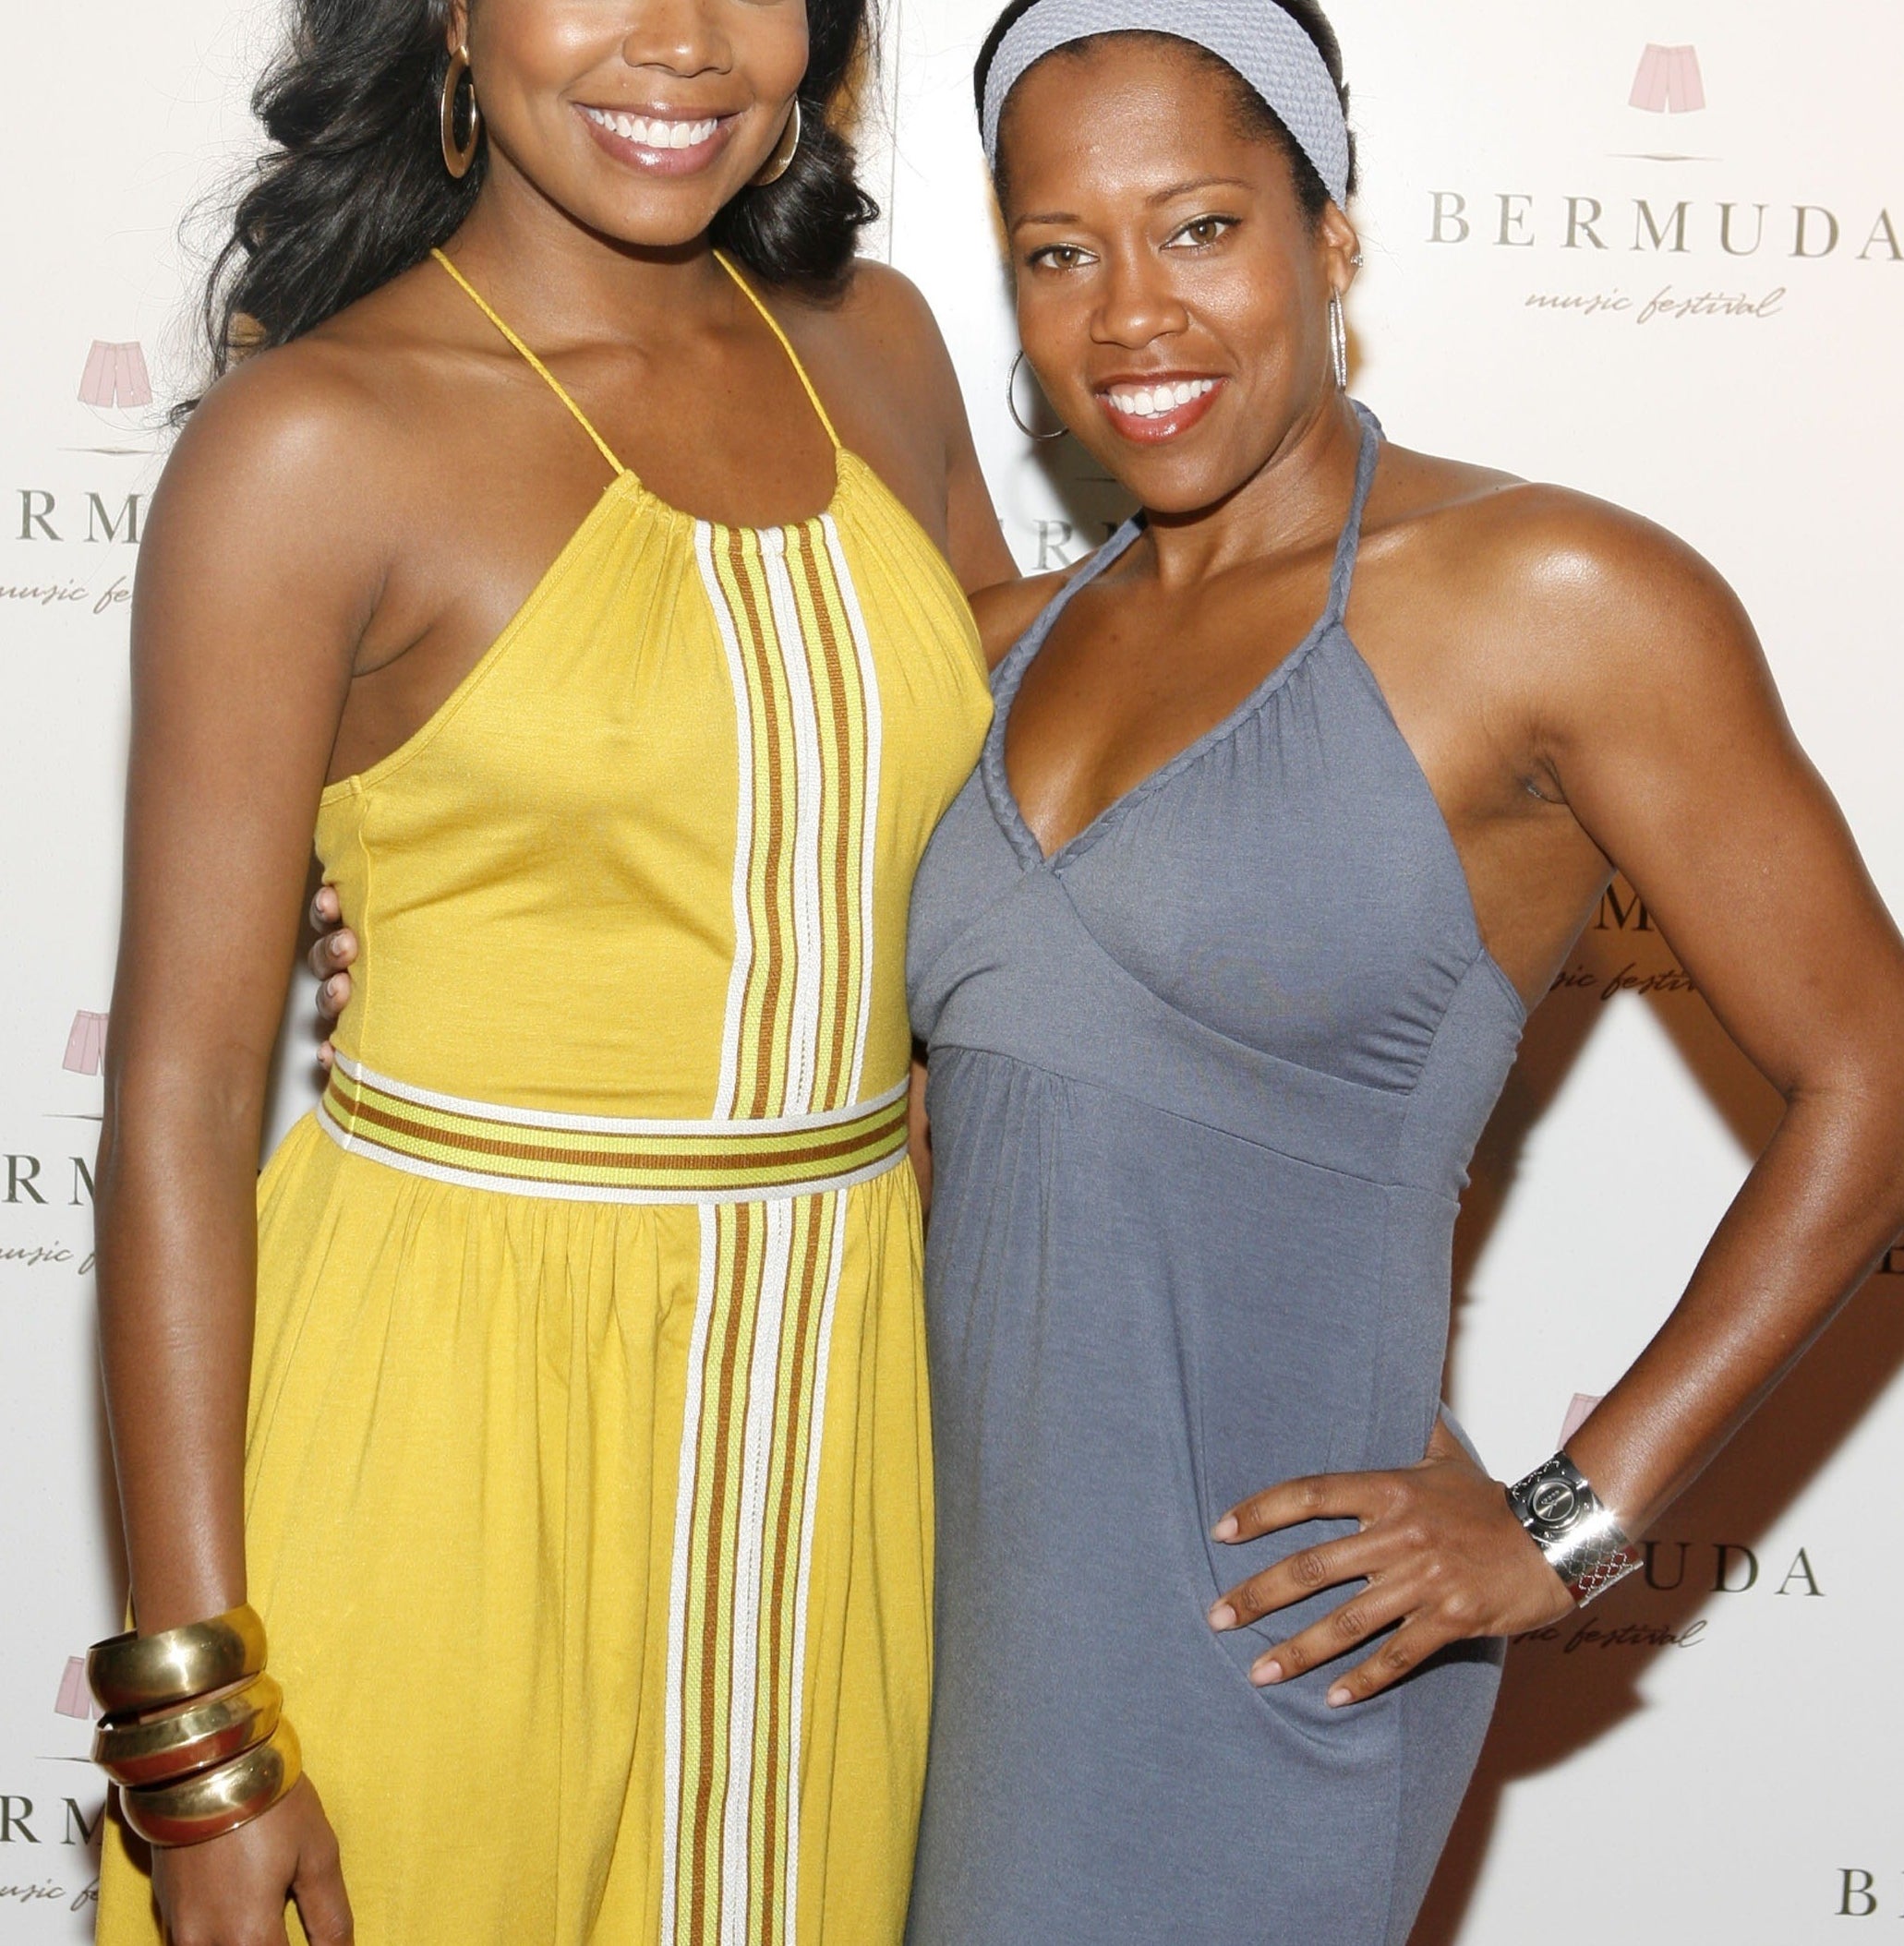 Photo of Gabrielle Union and Regina King at an event